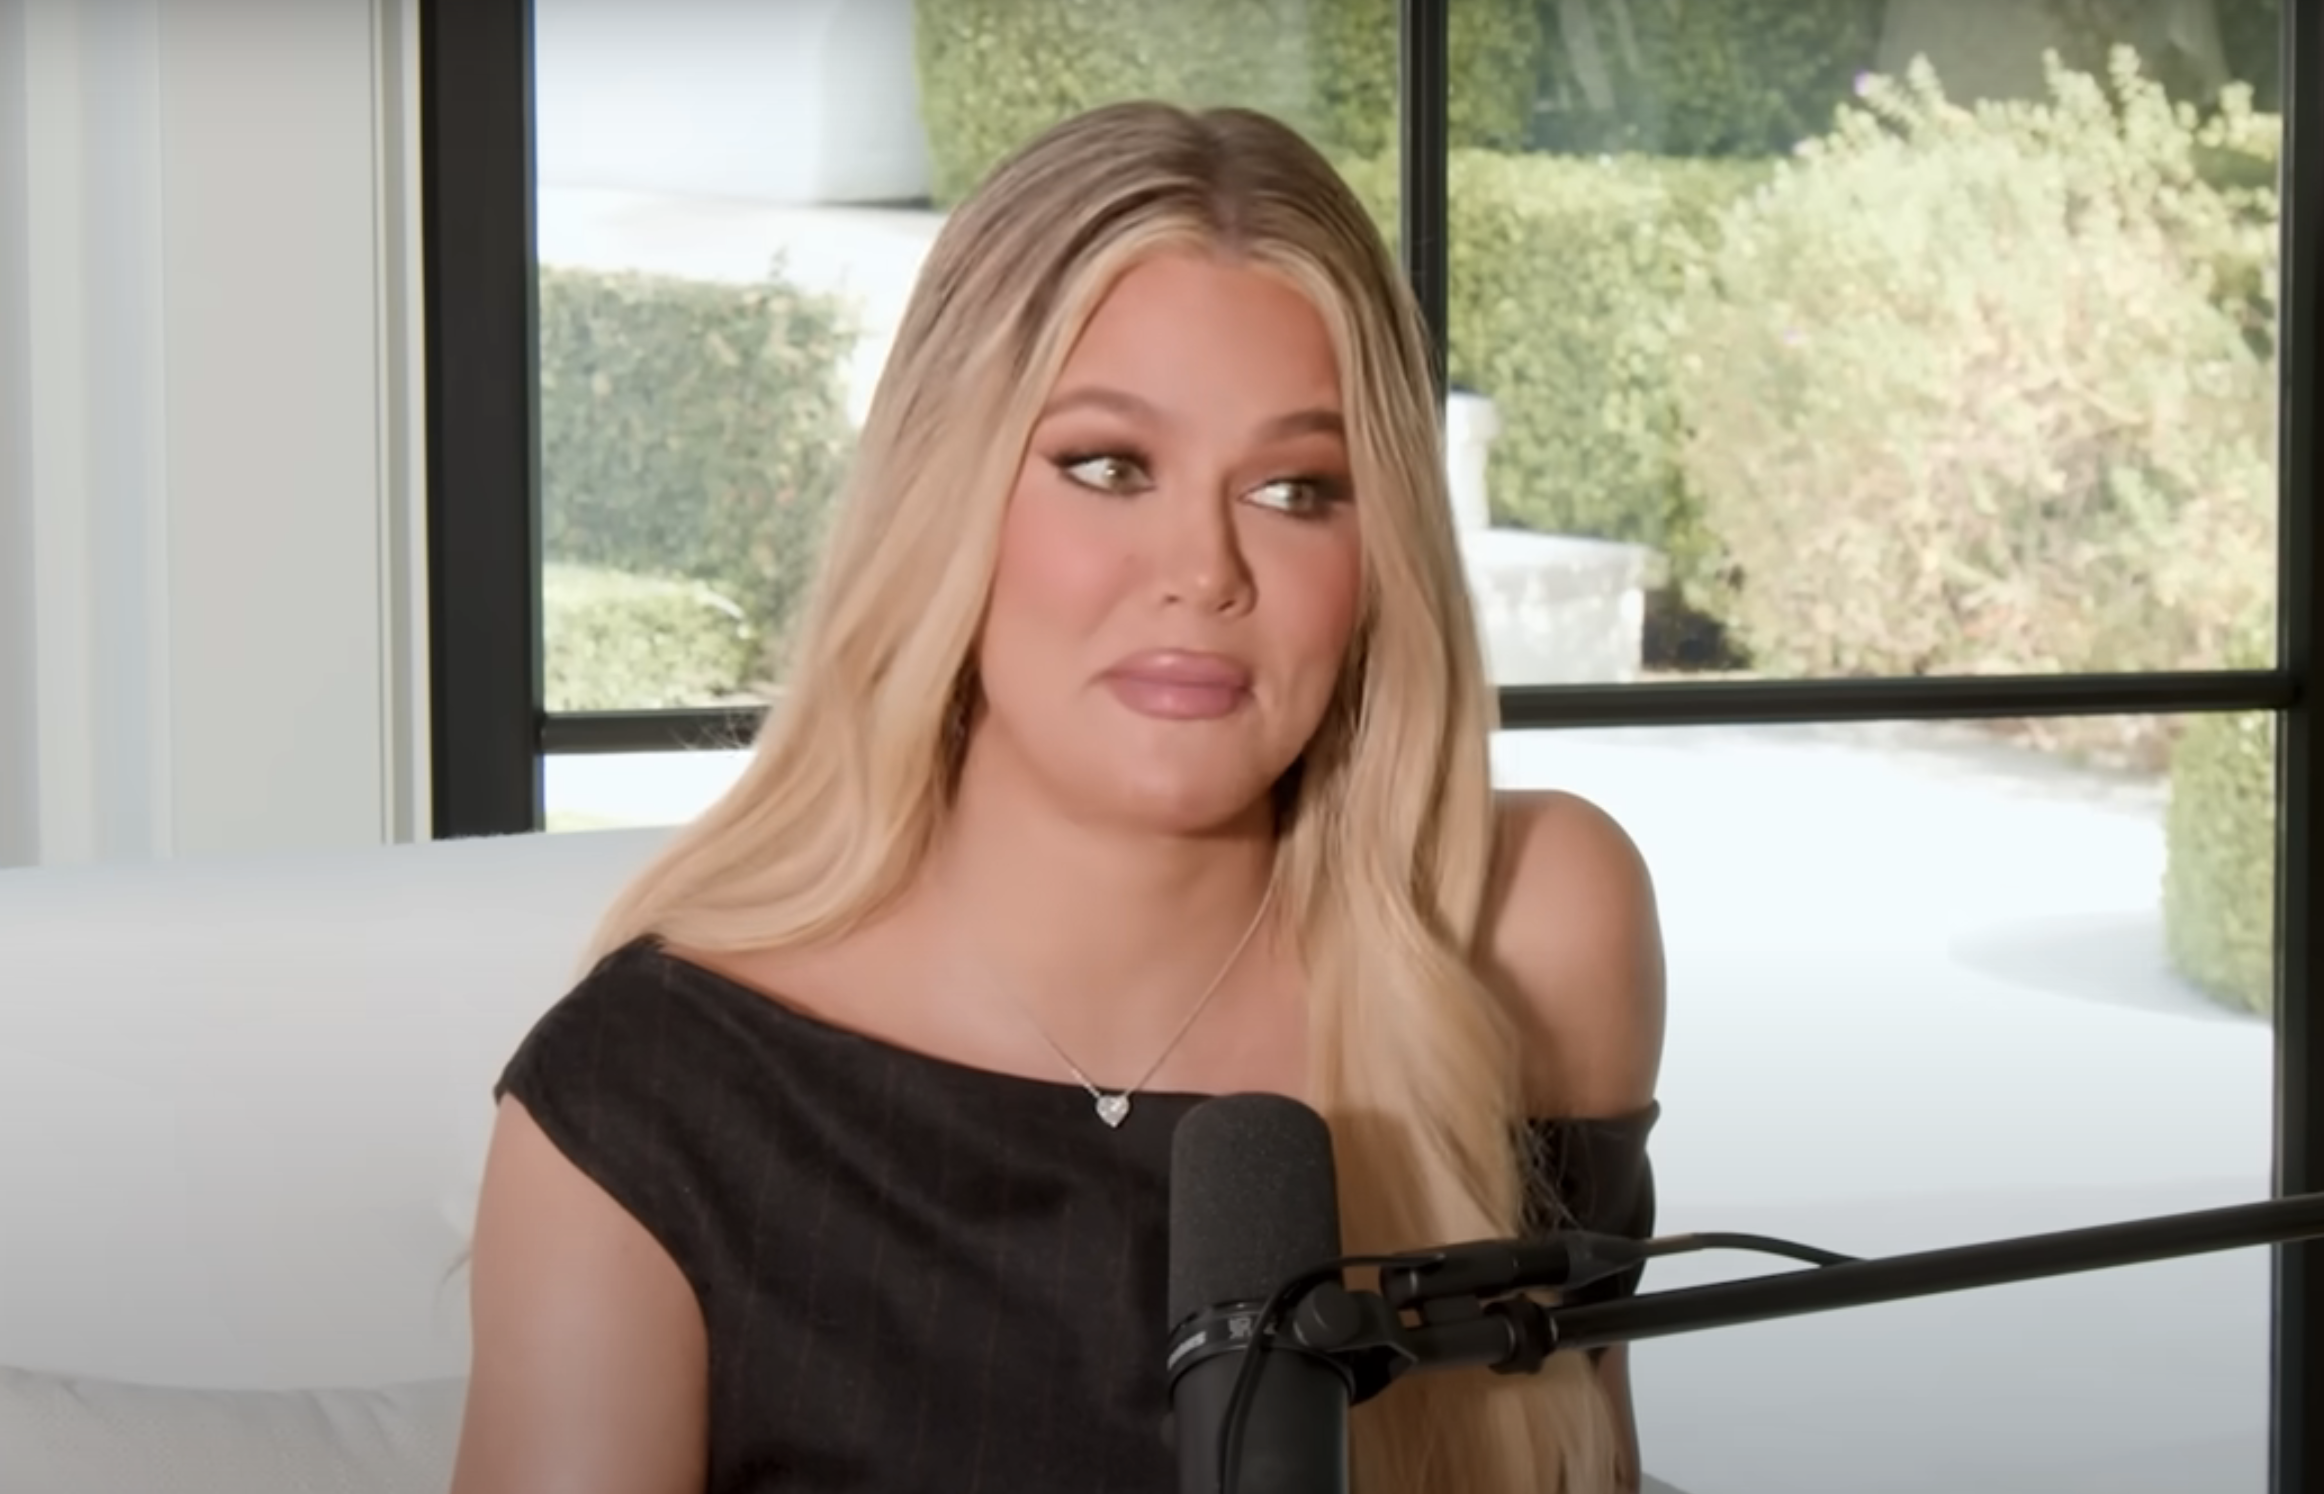 Khloé Kardashian Made Tristan Thompson Do Three Paternity Tests For Their Son Tatum Because He Looks So Much Like Her Brother Rob Kardashian